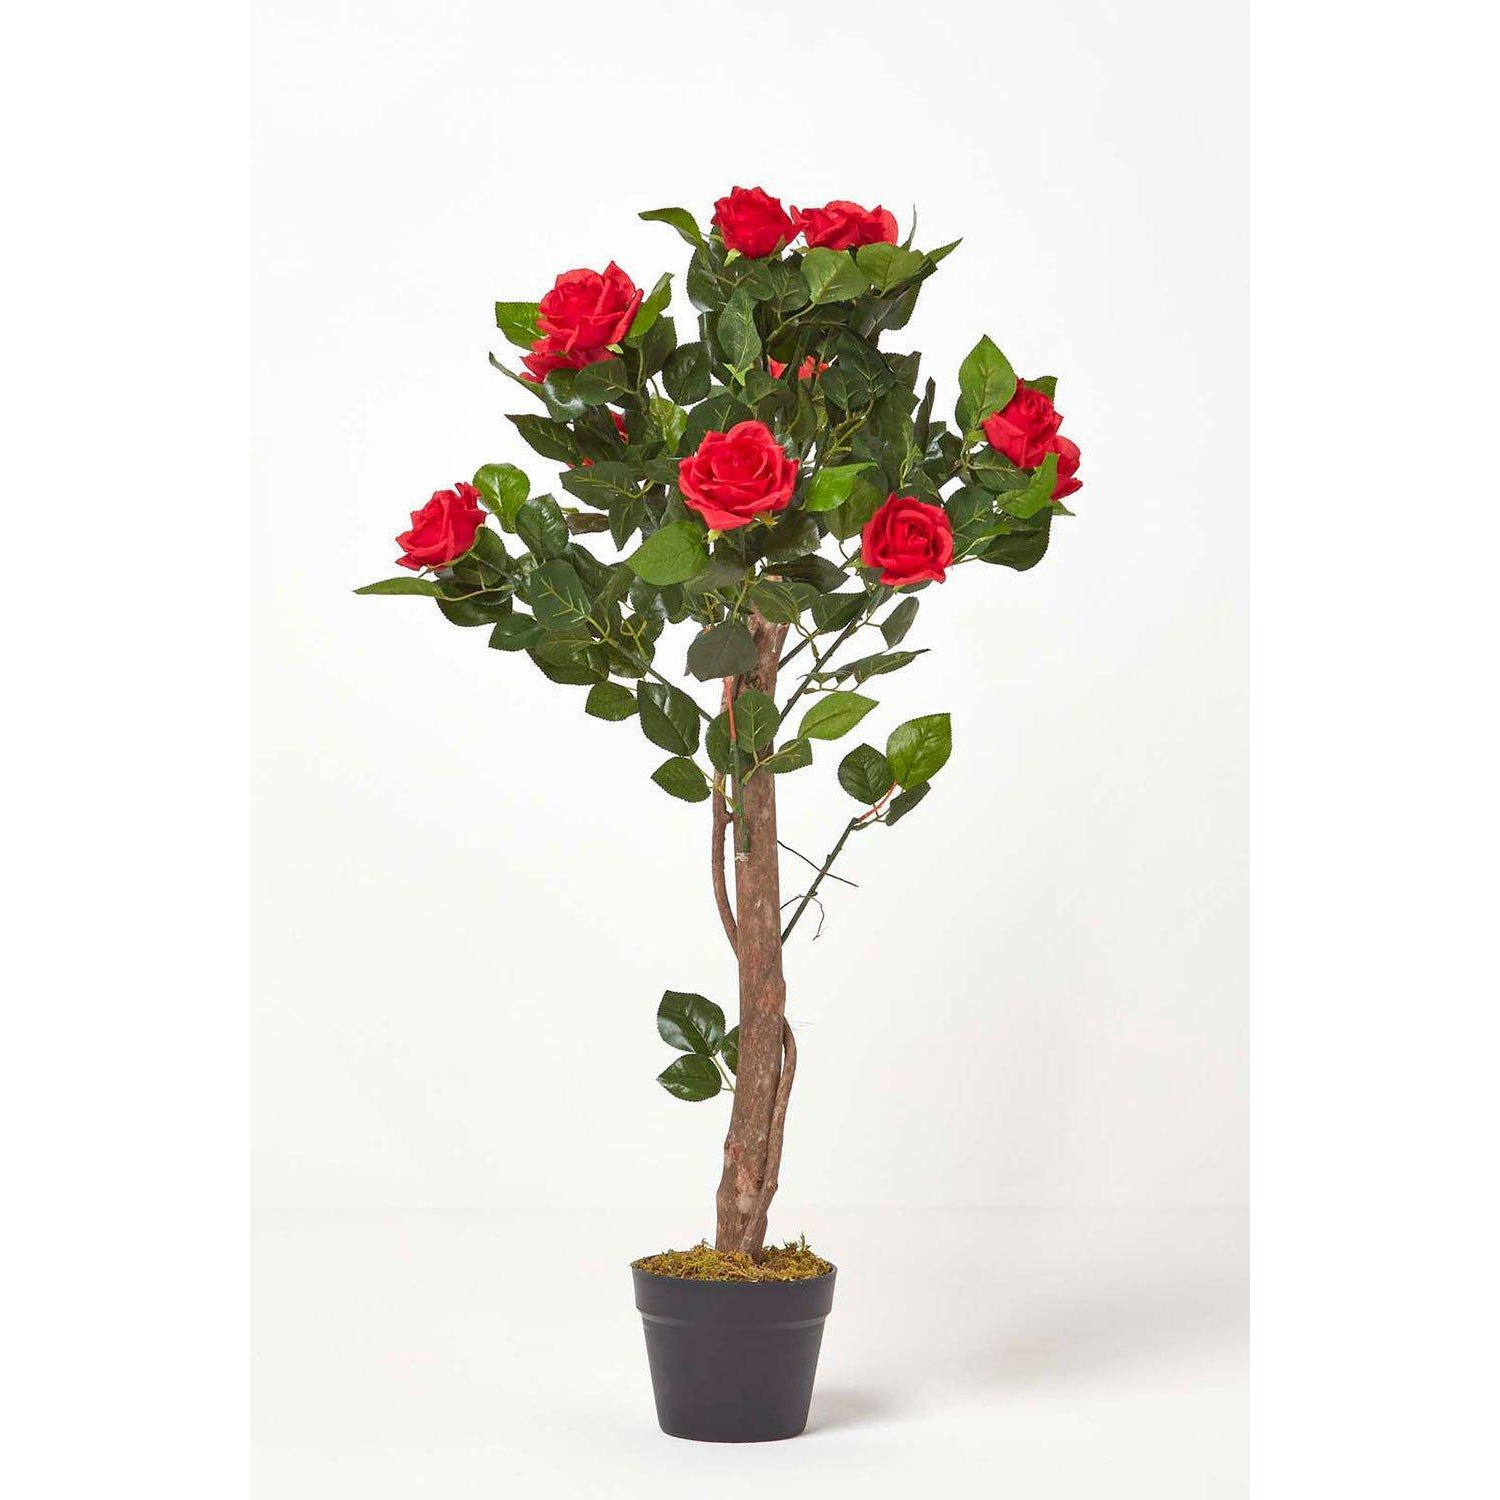 Potted Rose Tree Artificial Plant with lifelike green leaves, 90 cm - image 1